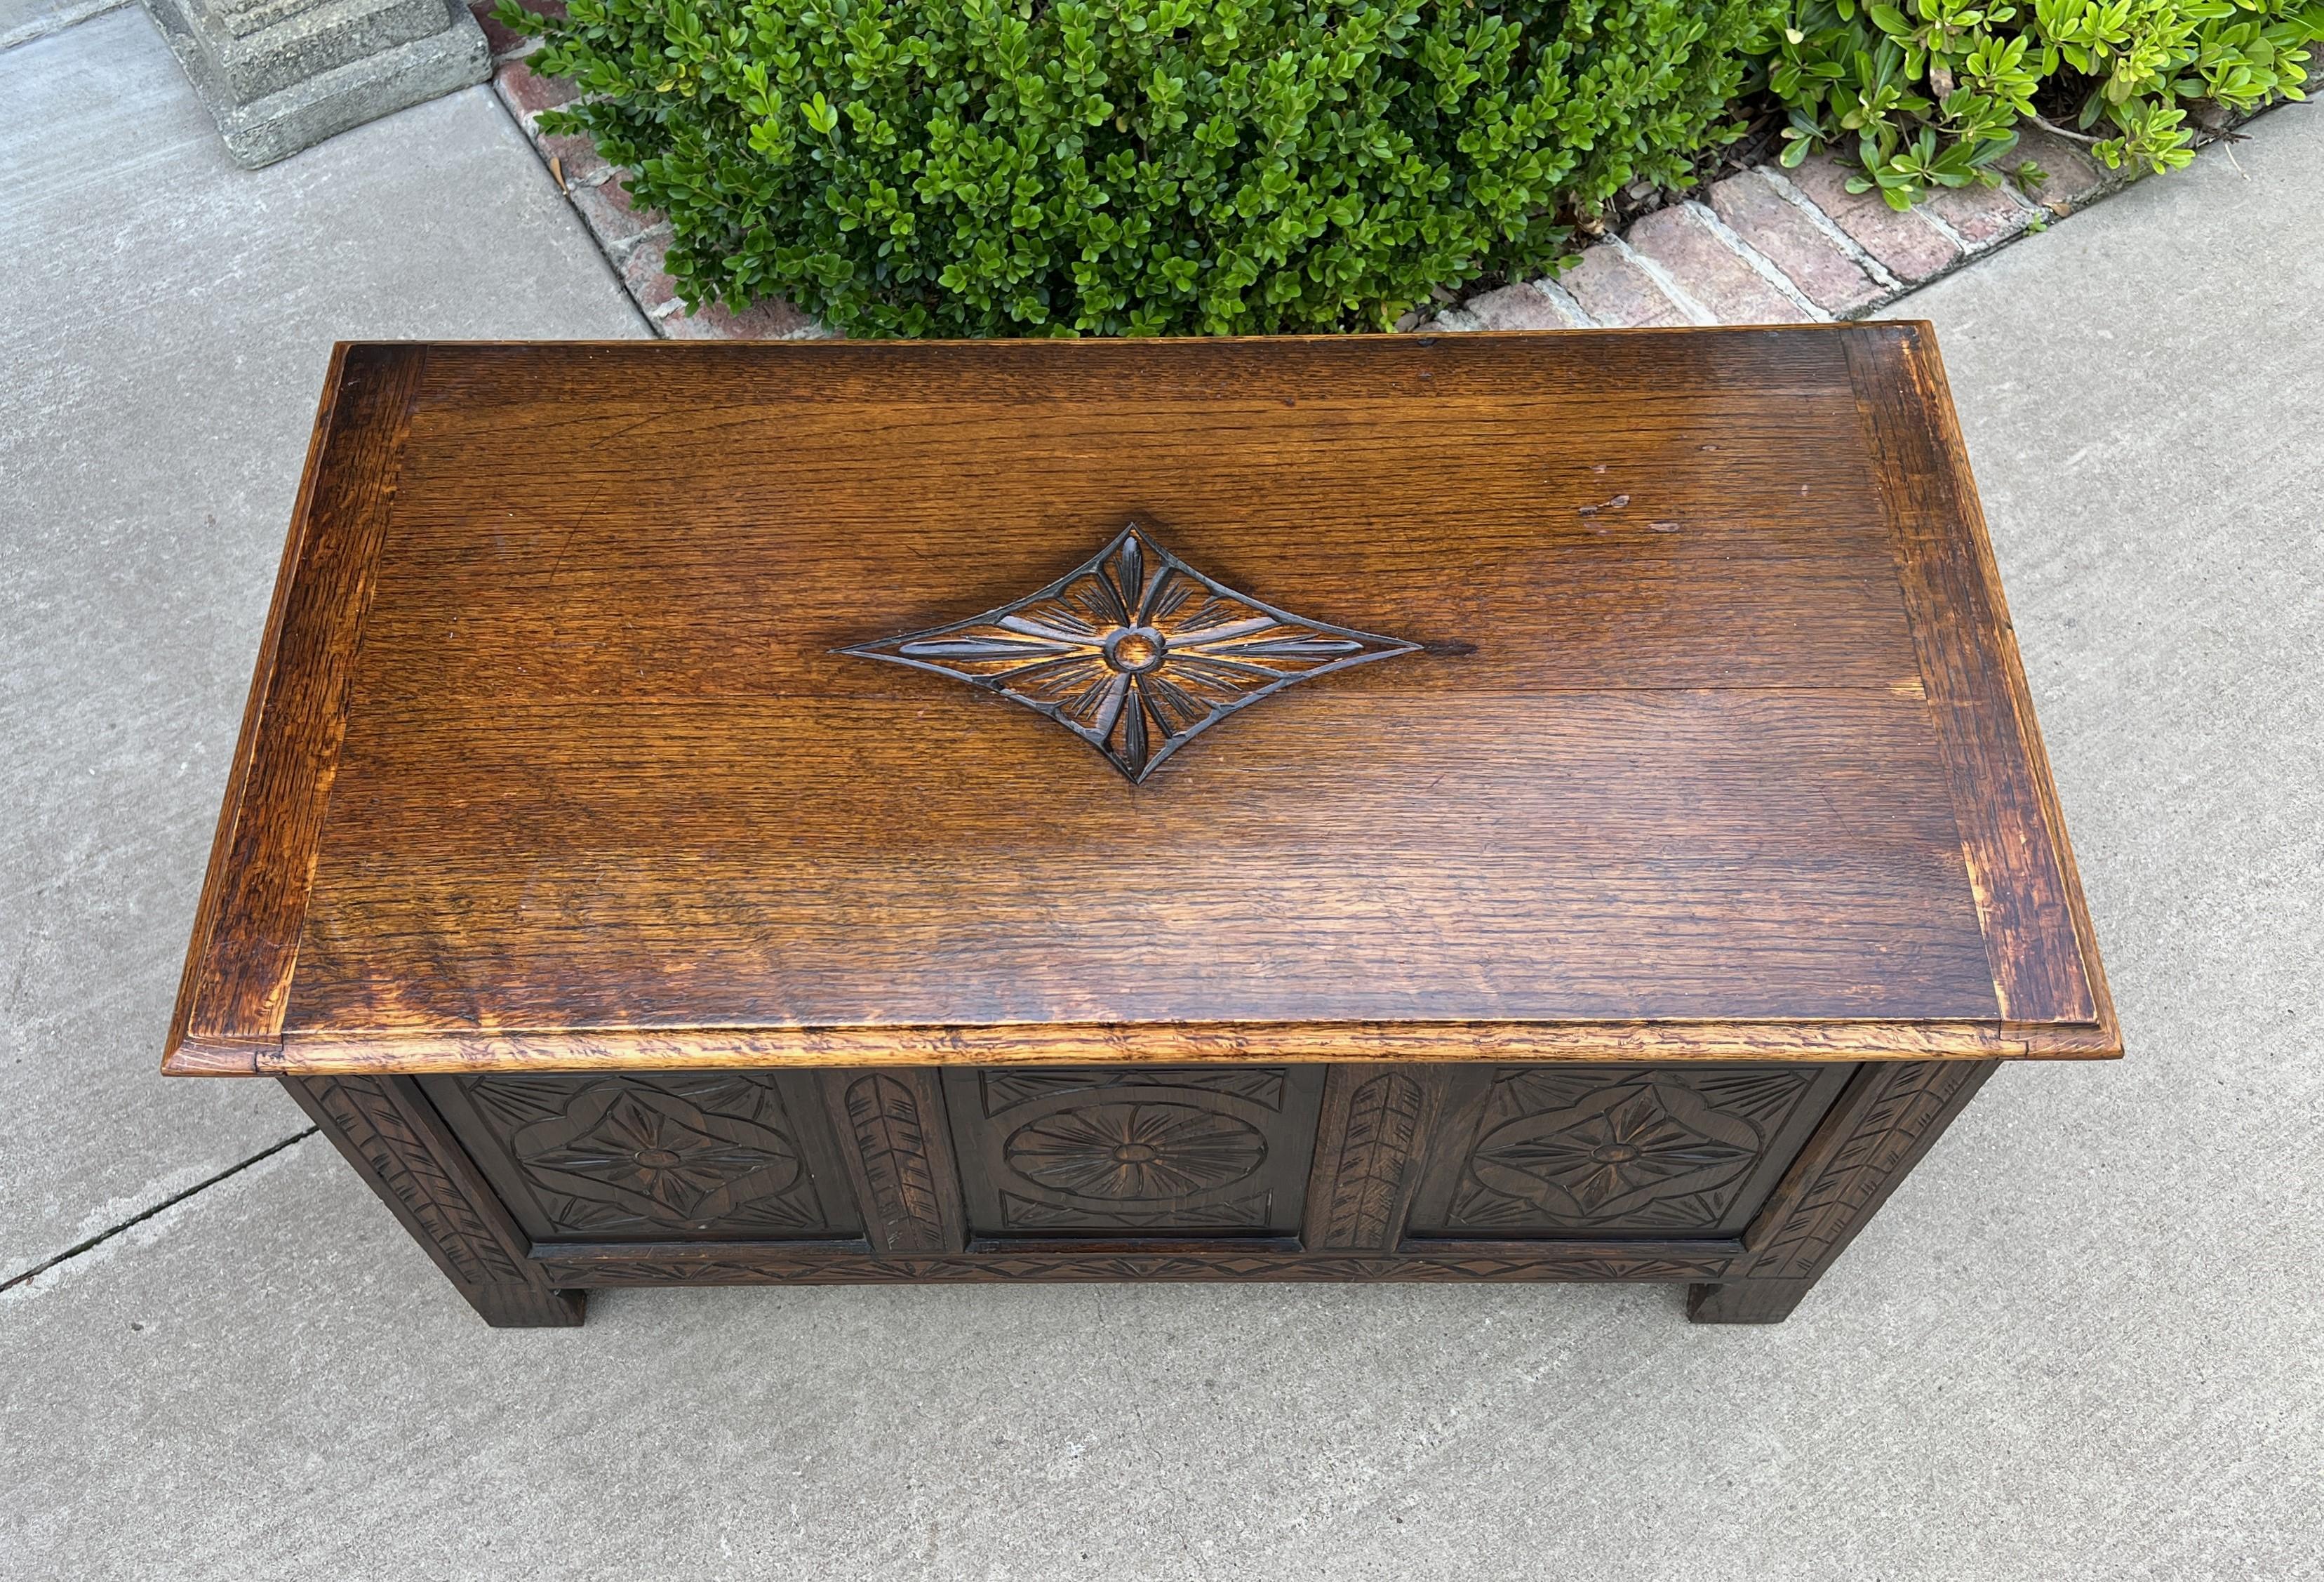 Early 20th Century Antique English Blanket Box Chest Trunk Coffee Table Storage Chest Carved Oak